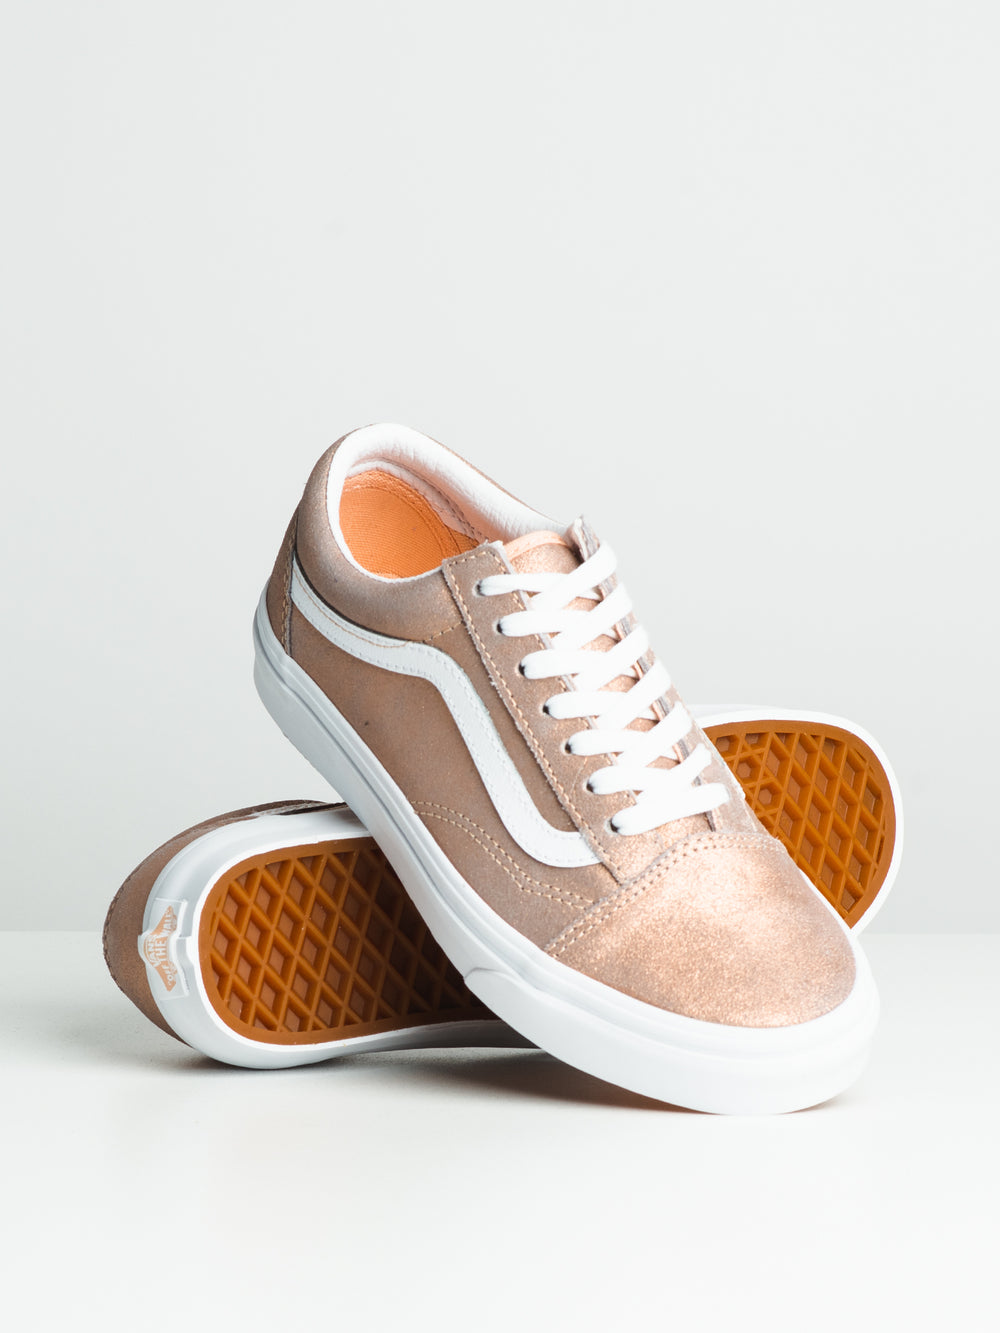 WOMENS OLD SKOOL - ROSE GOLD - CLEARANCE